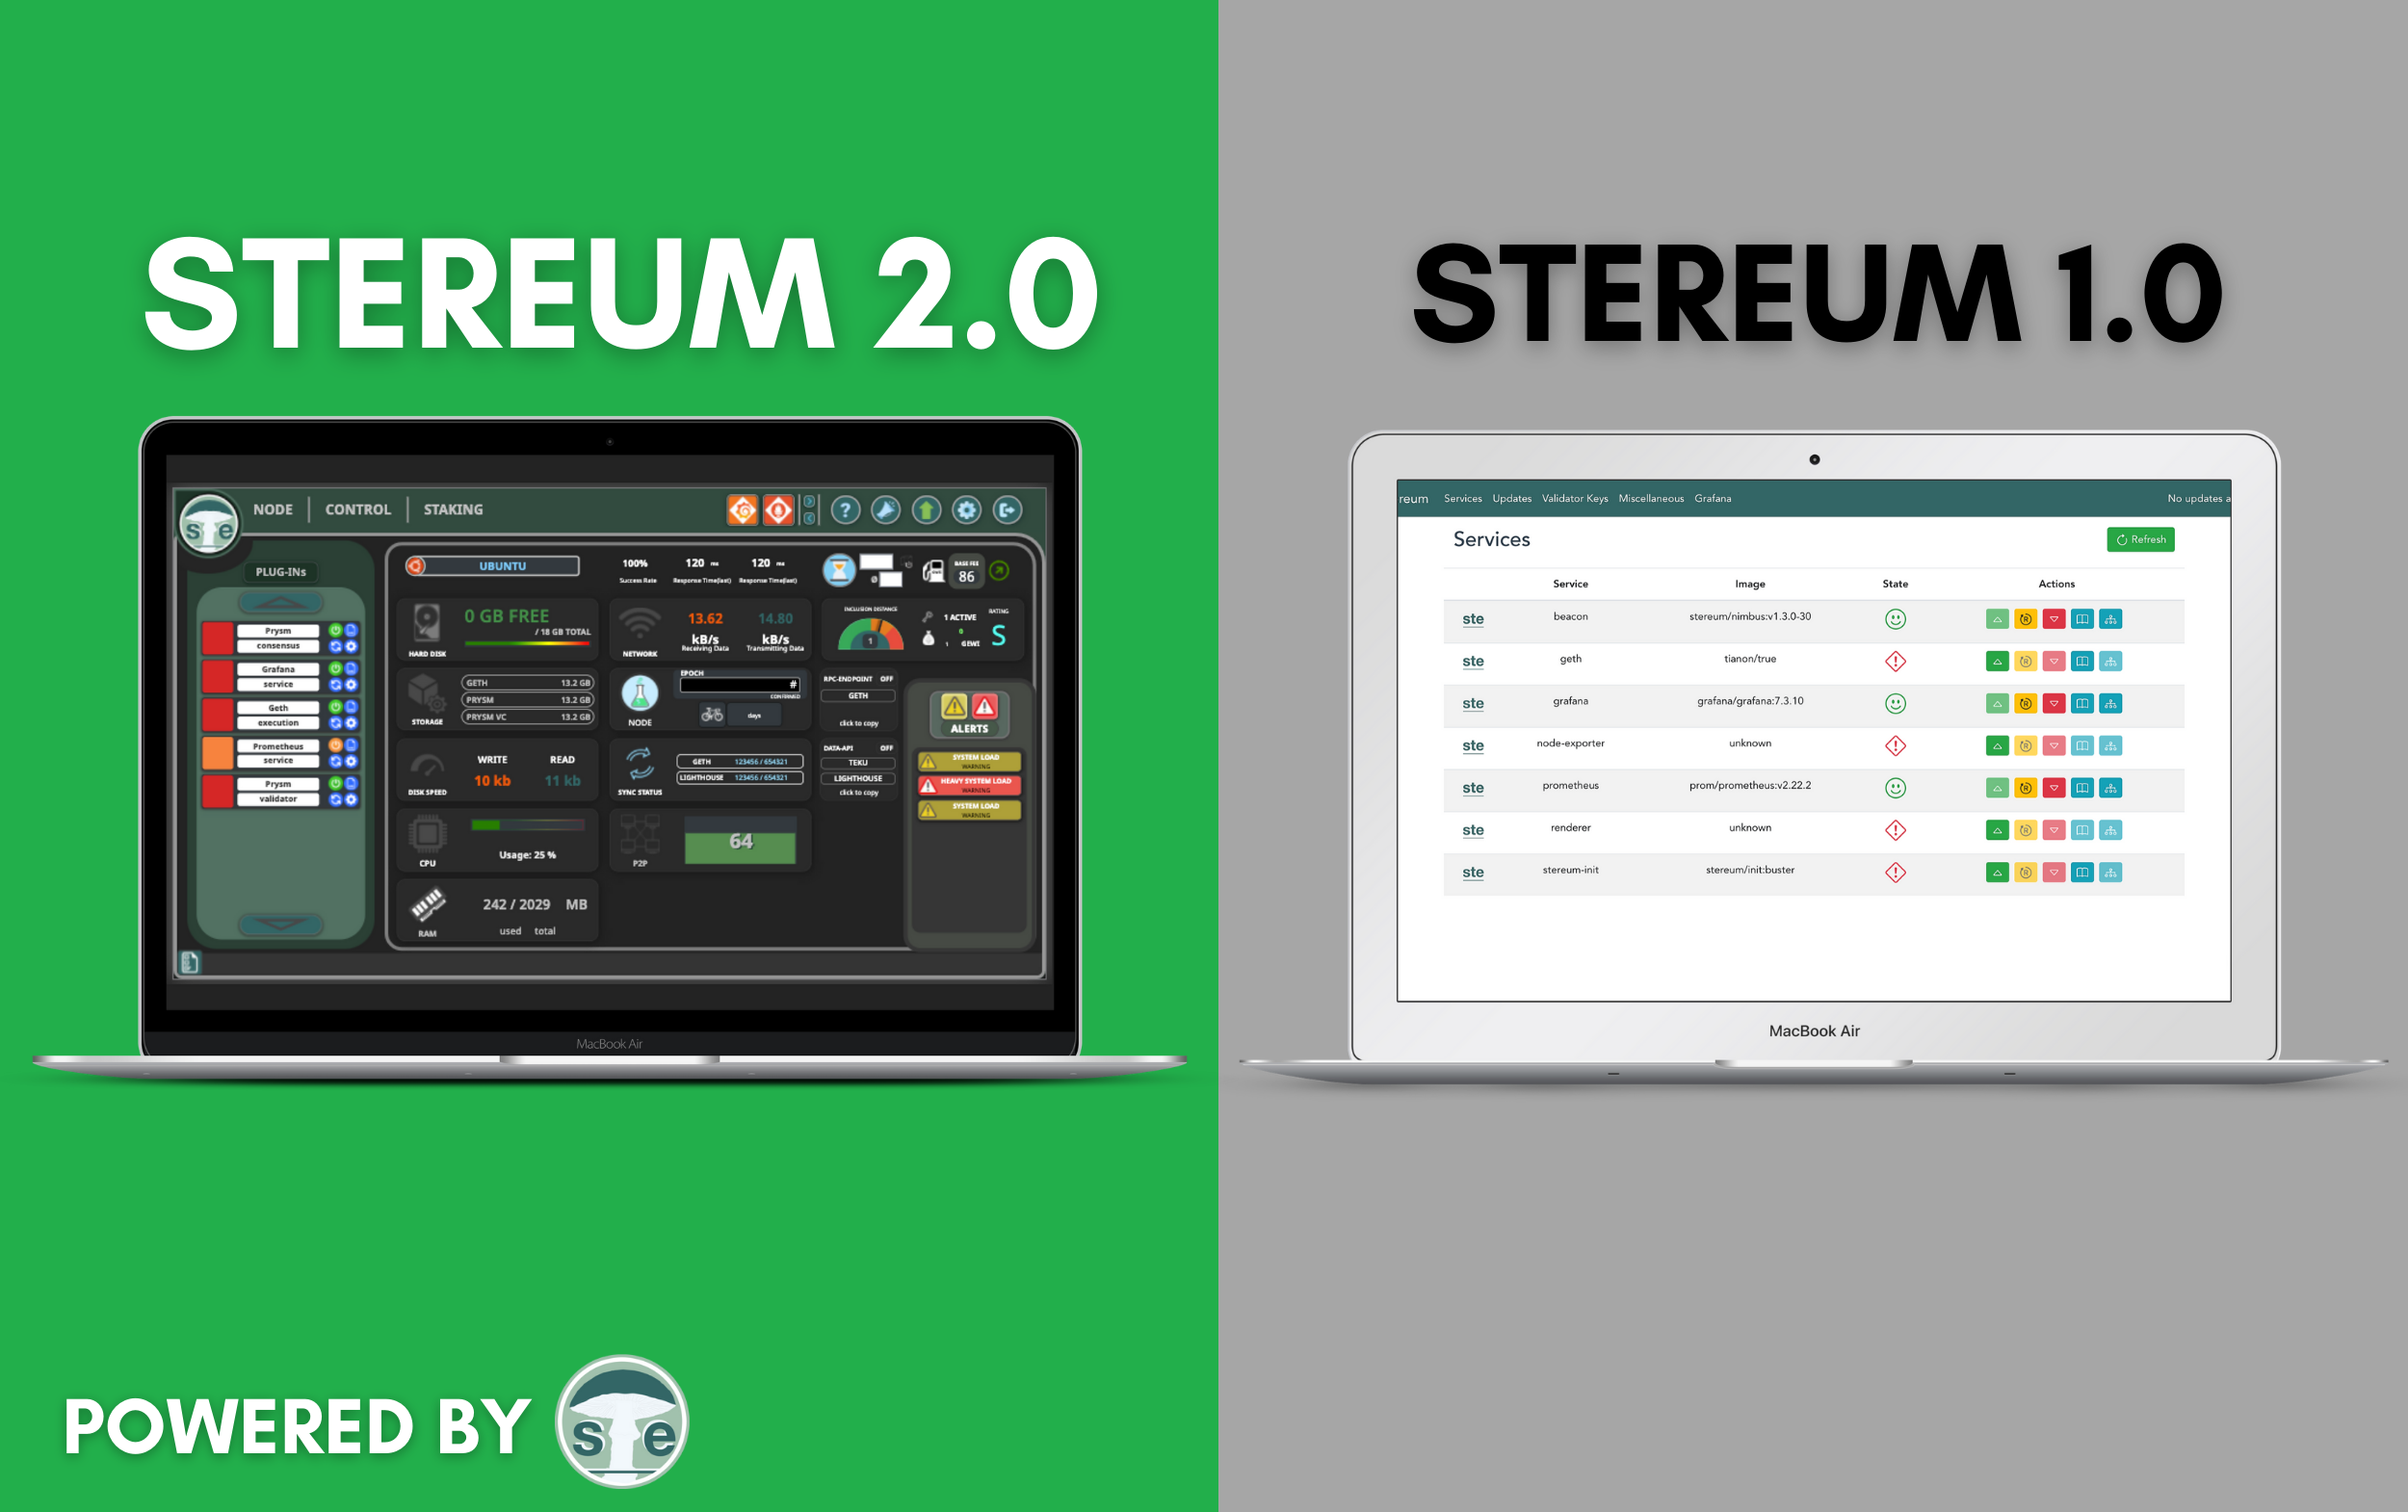 Ethereum Merge Support   & The End of Stereum 1.X Support ​